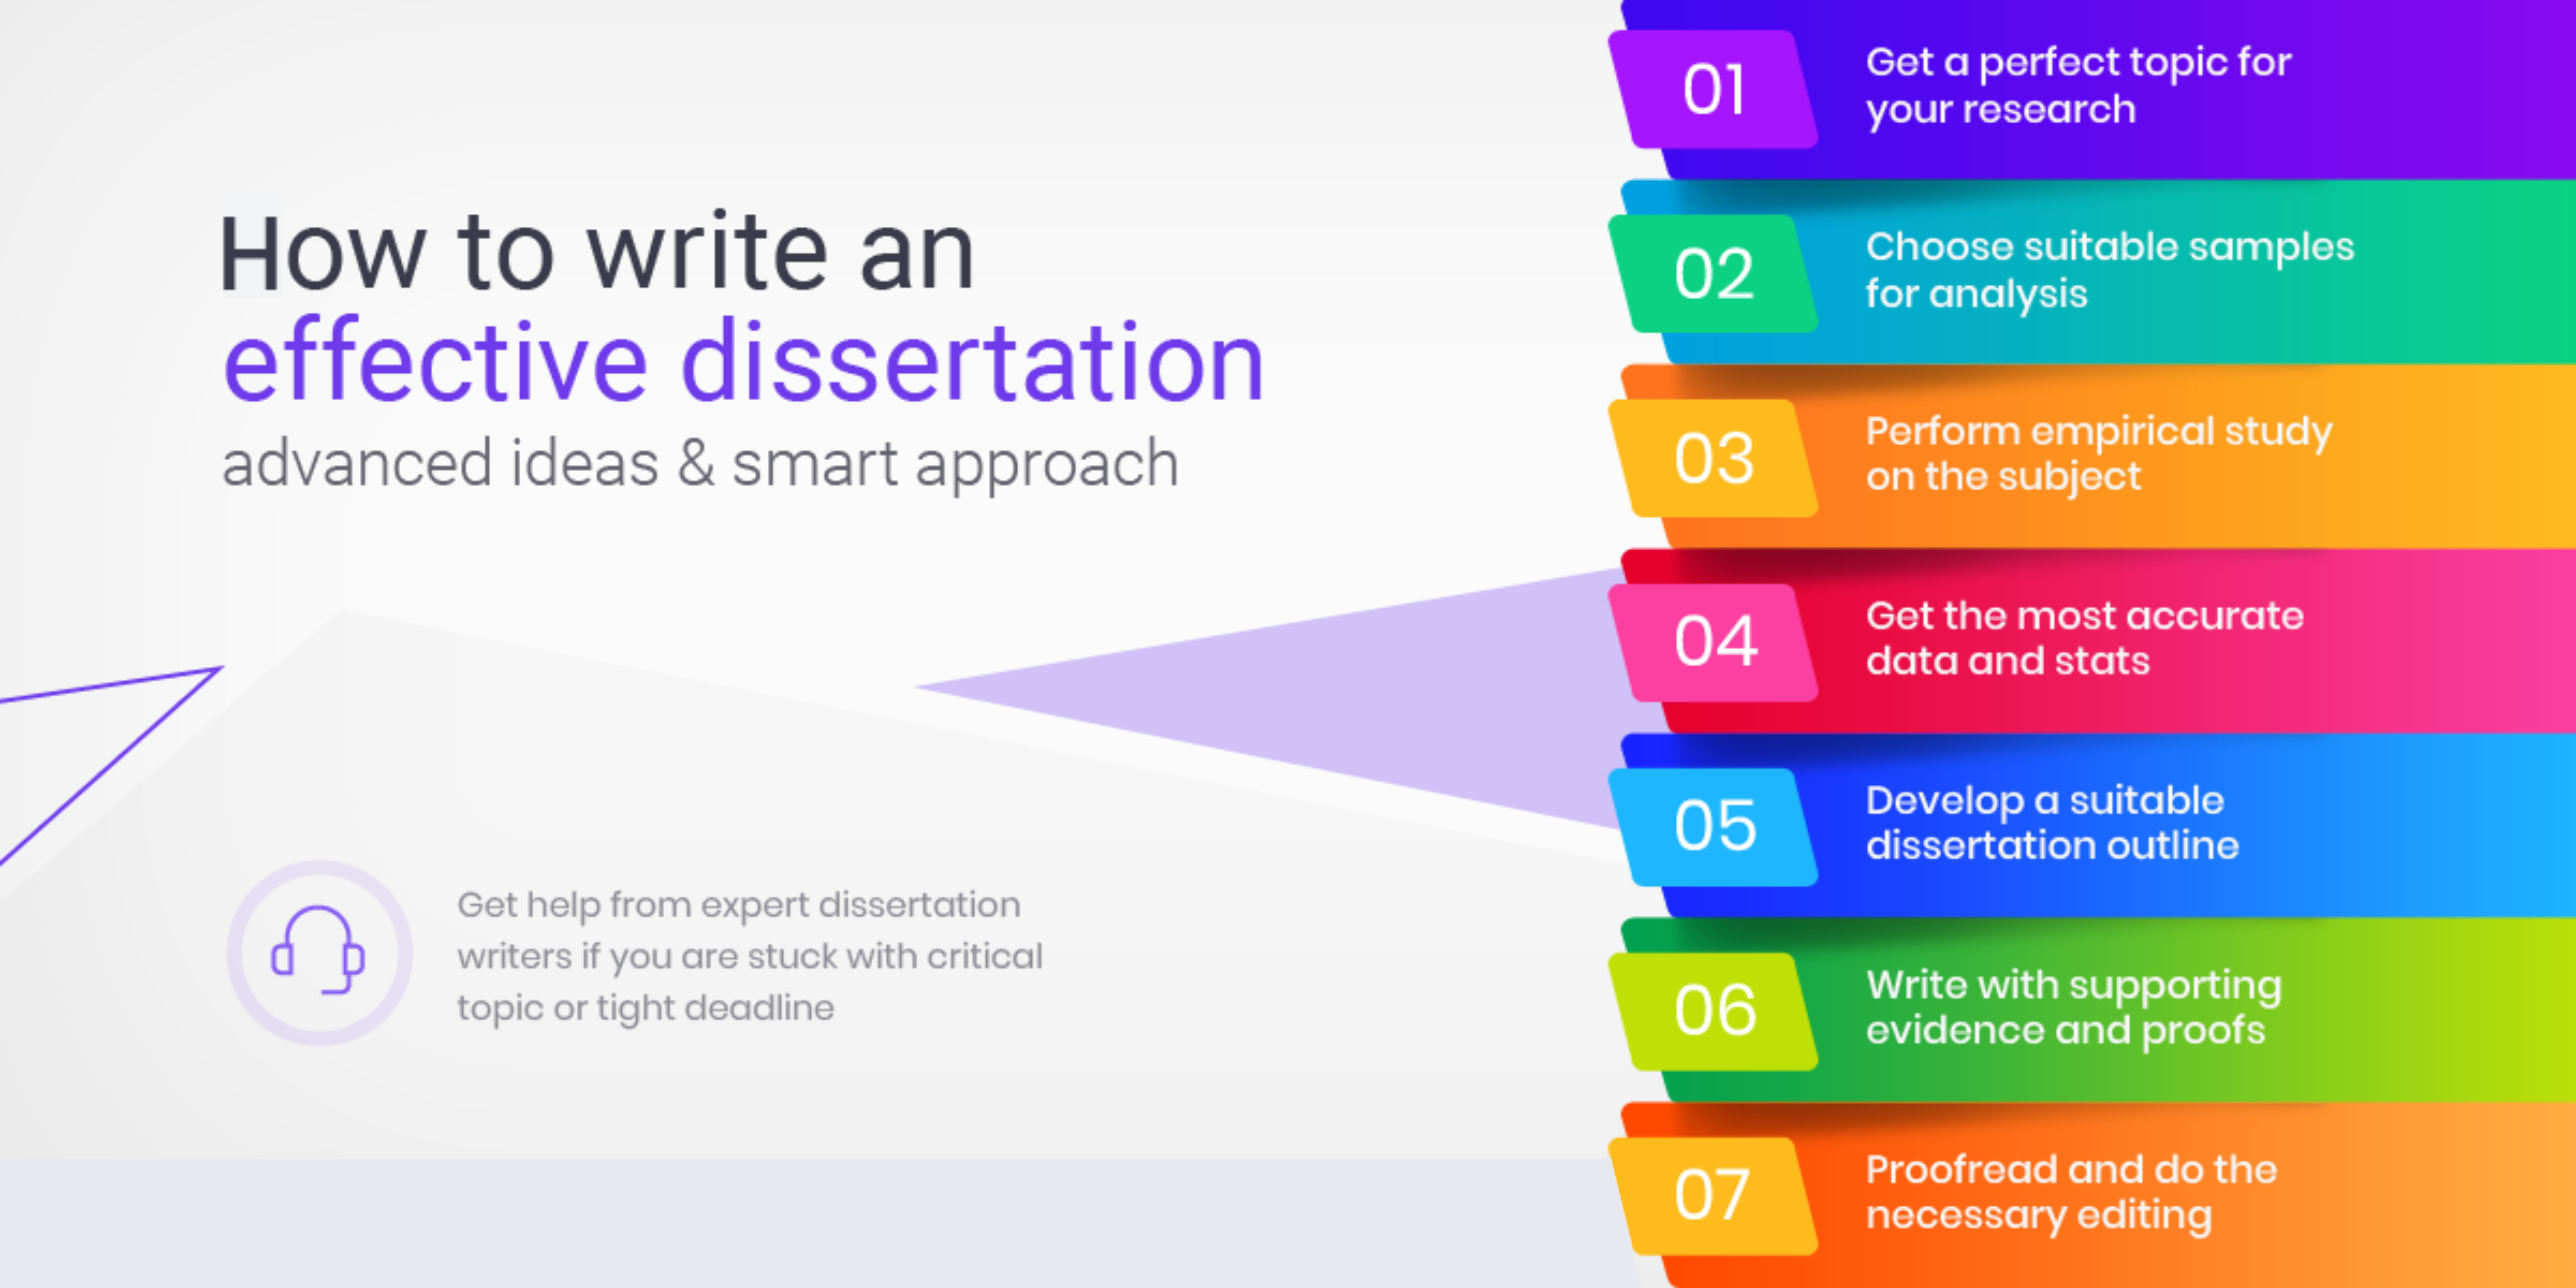 How to write an effective dissertation